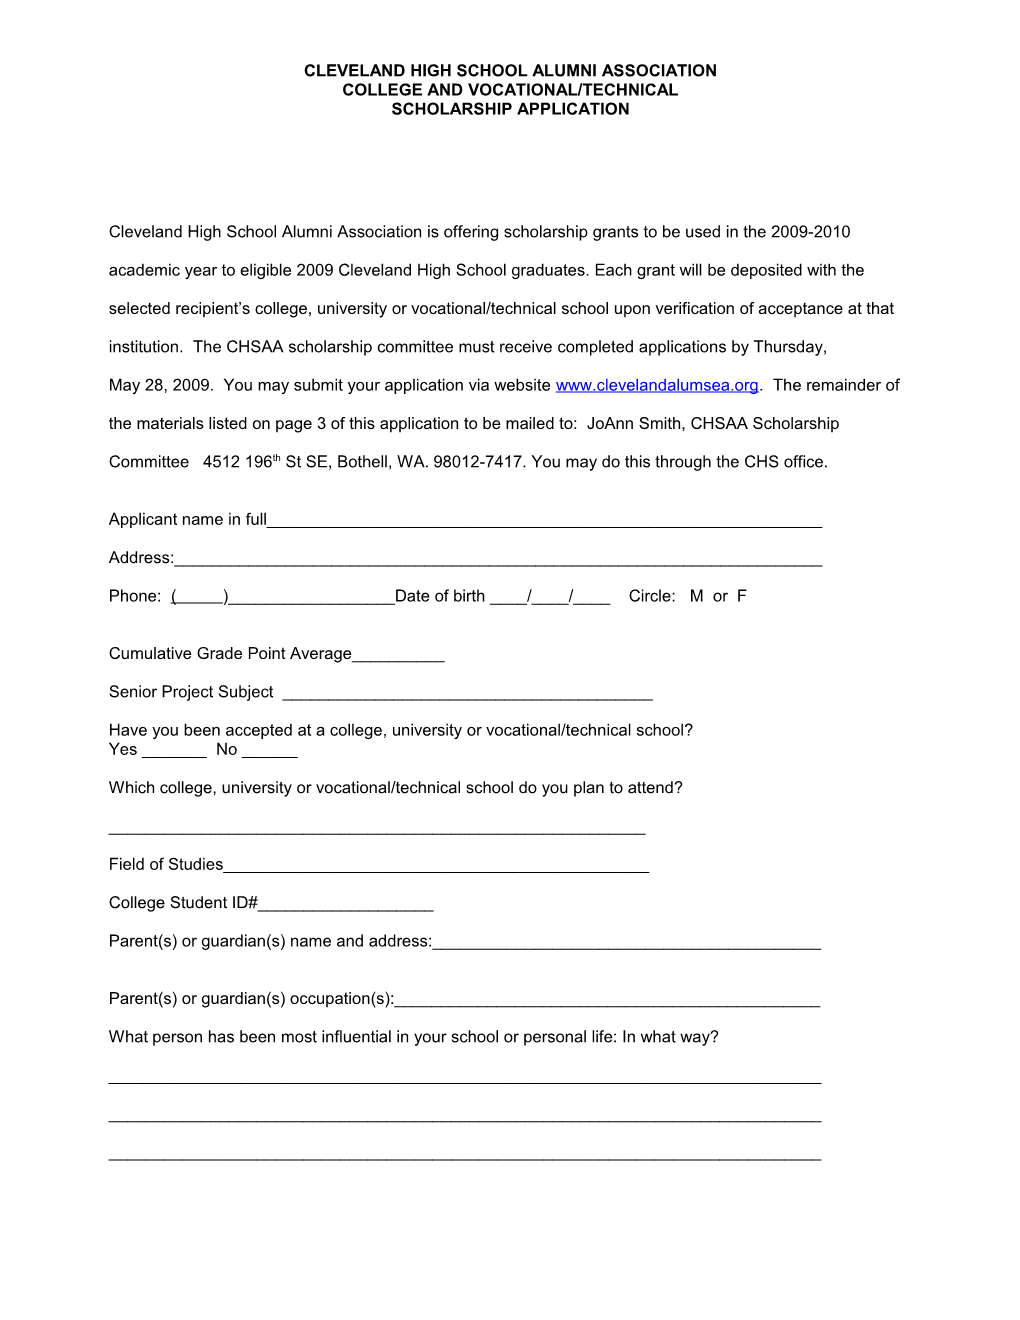 The Cleveland High School Alumni Association Is Offering Scholarship Grants for the 2001-2002